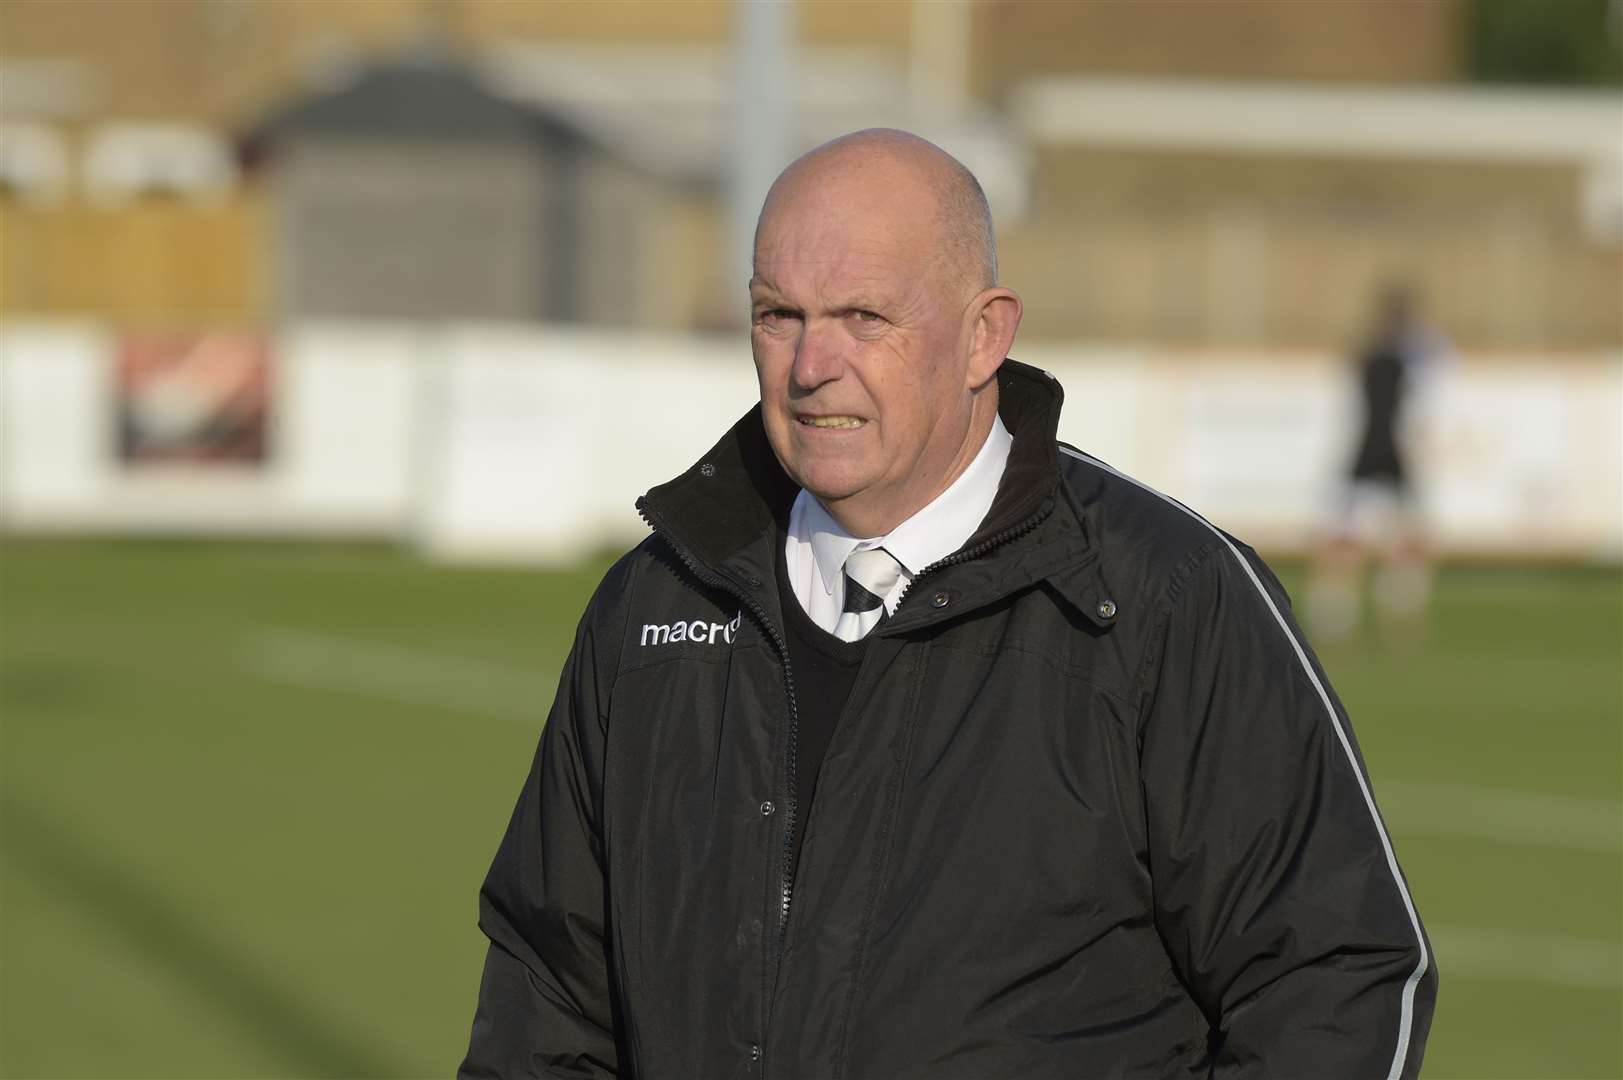 Deal Town manager Derek Hares. Picture: Tony Flashman